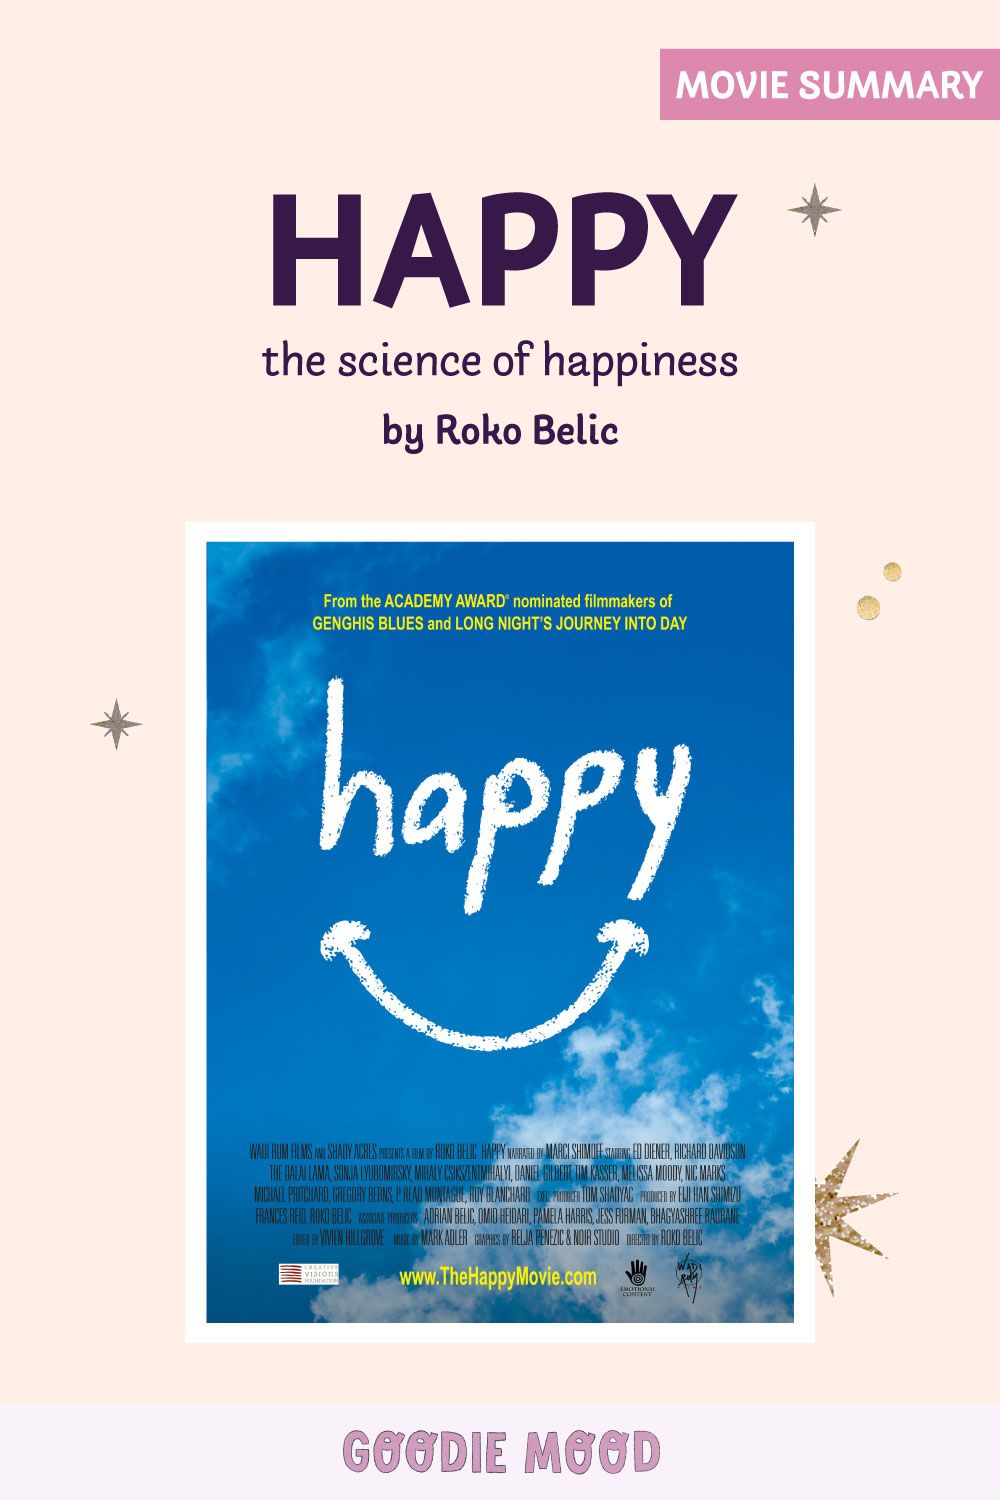 Summary of the Documentary "Happy, the science of happiness" by Roko Belic on Goodie Mood blog
